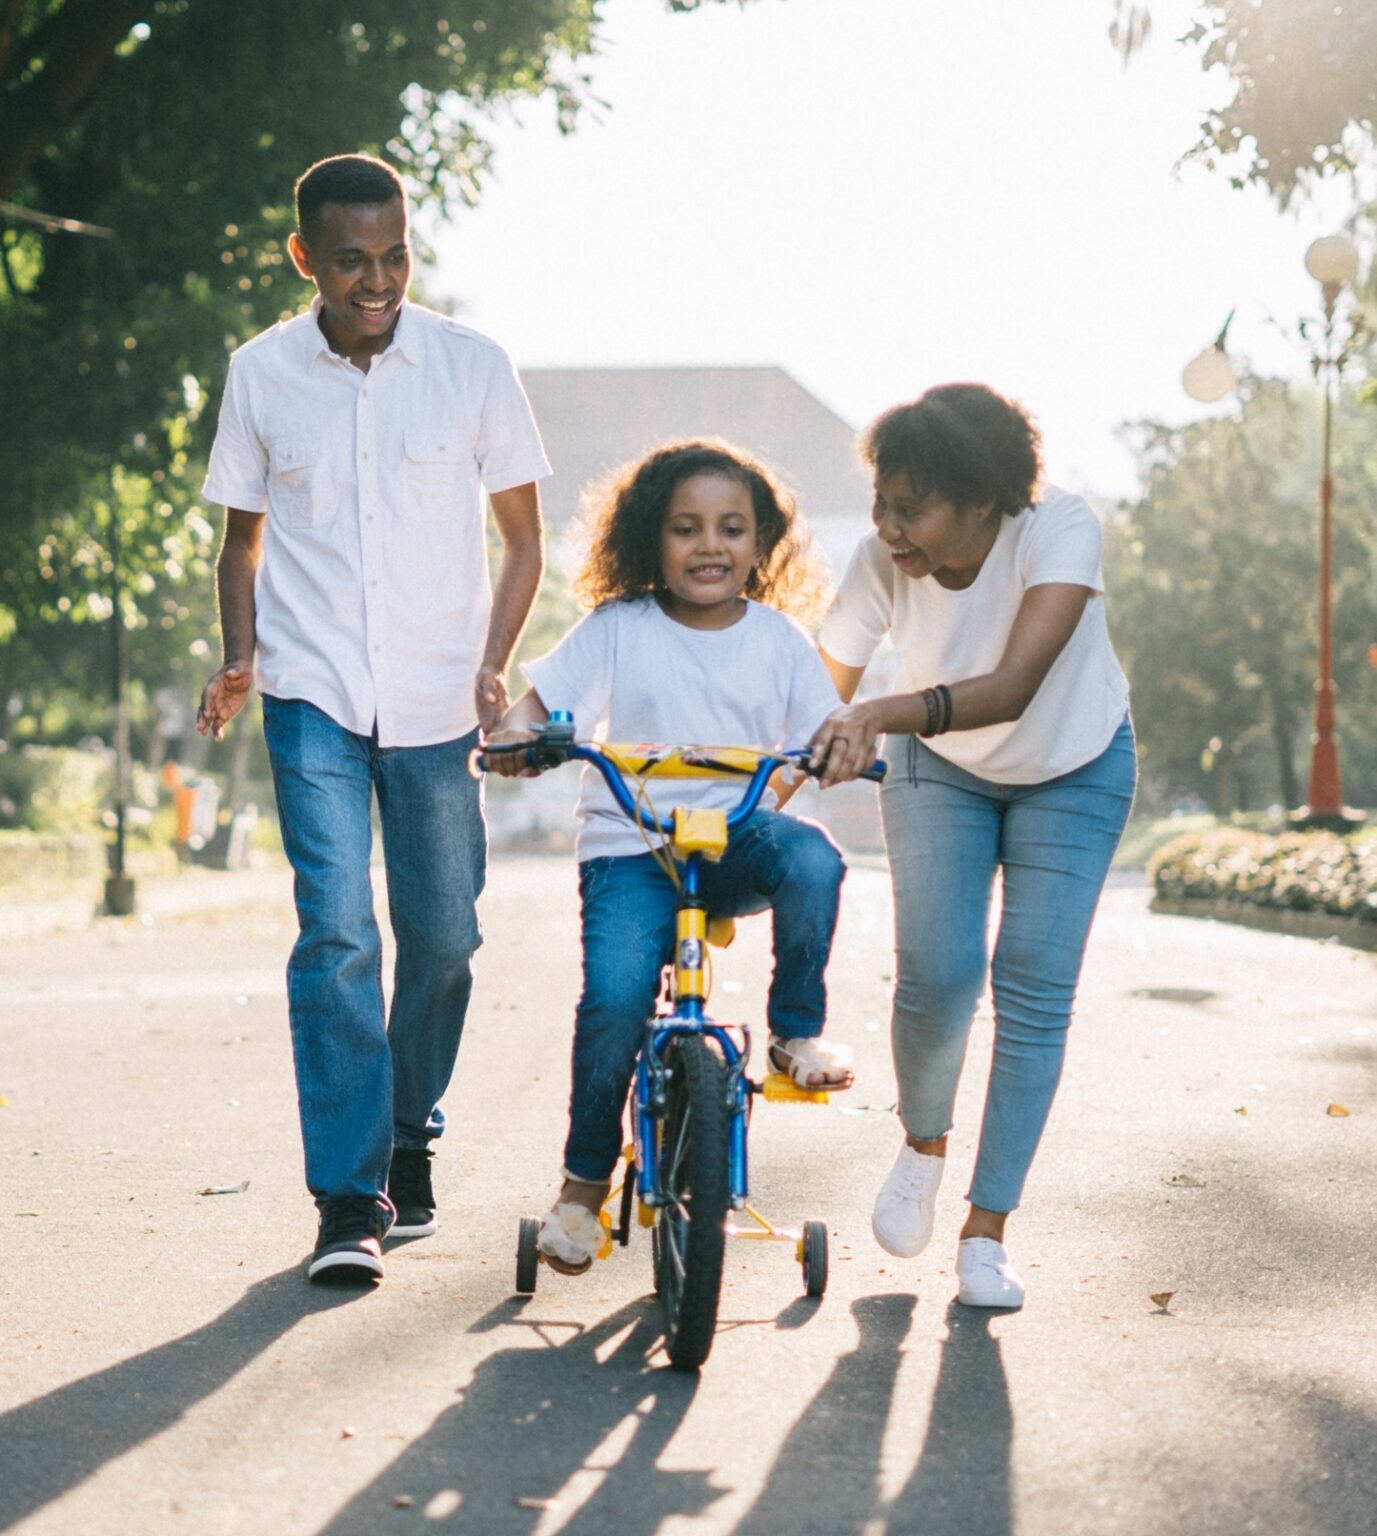 A Black mom and dad are teaching their child to ride a bike in a residential area